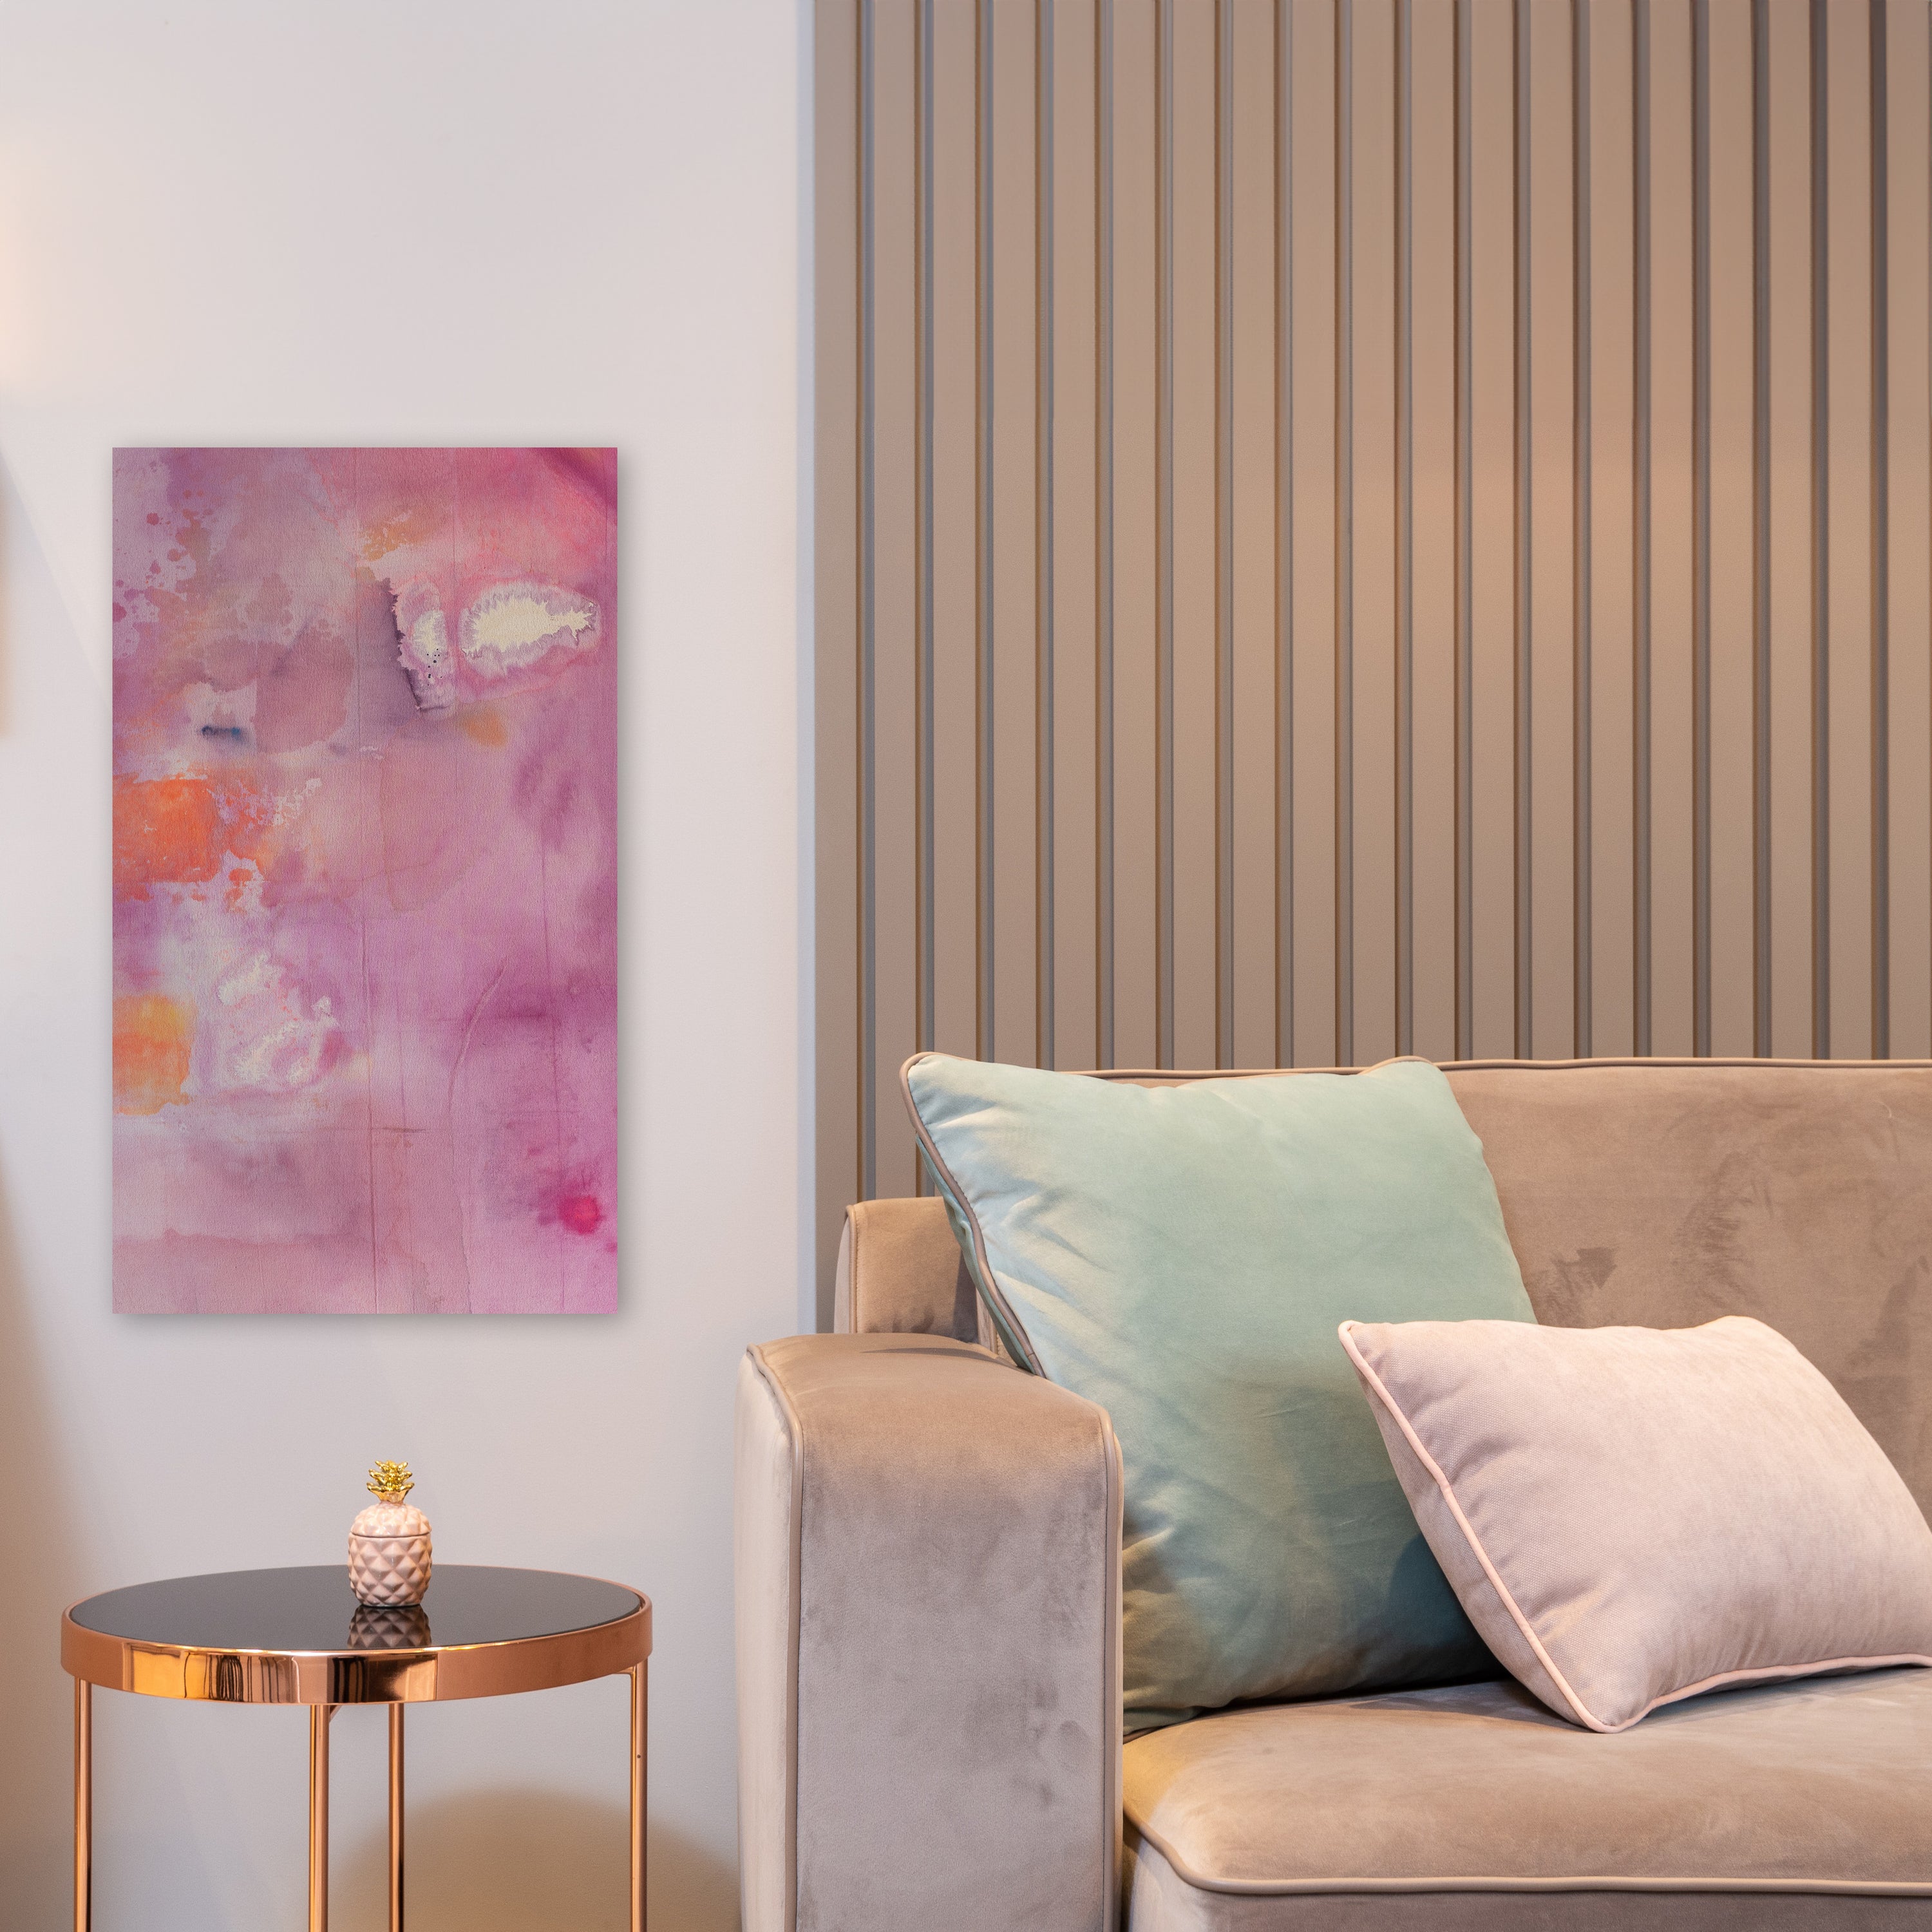 Purple and orange painting hangs above a side table, next to a couch.